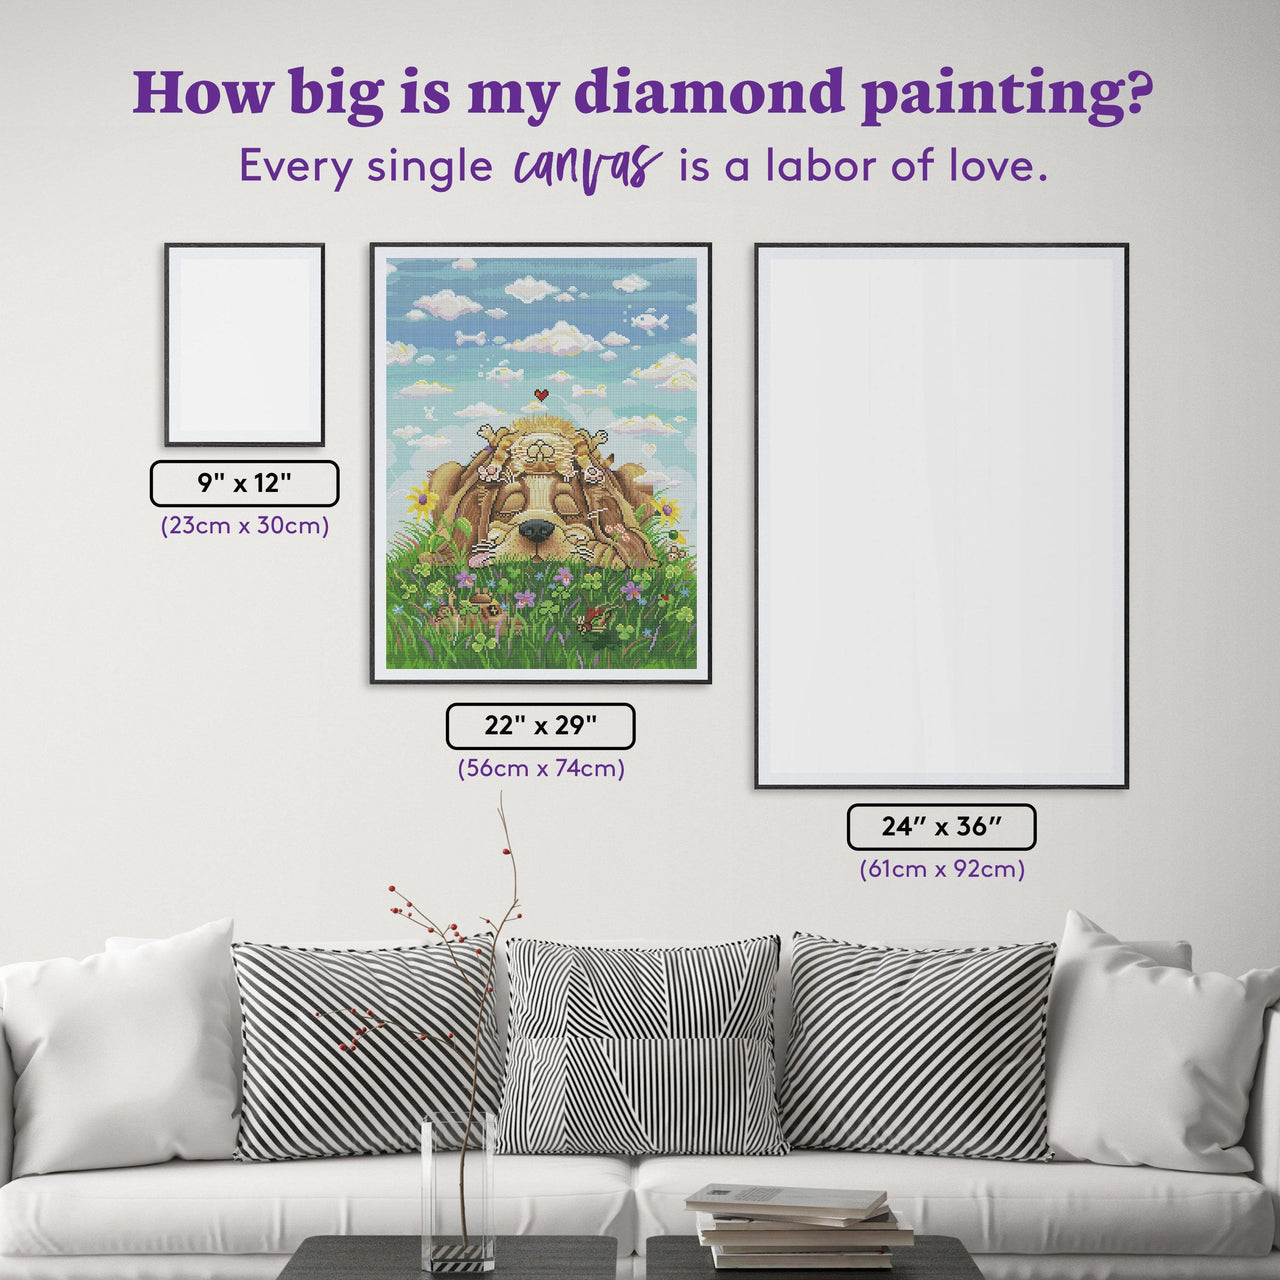 Diamond Painting Lazy Day Afternoon 22" x 29″ (56cm x 74cm) / Round with 47 Colors including 2 ABs / 52,337